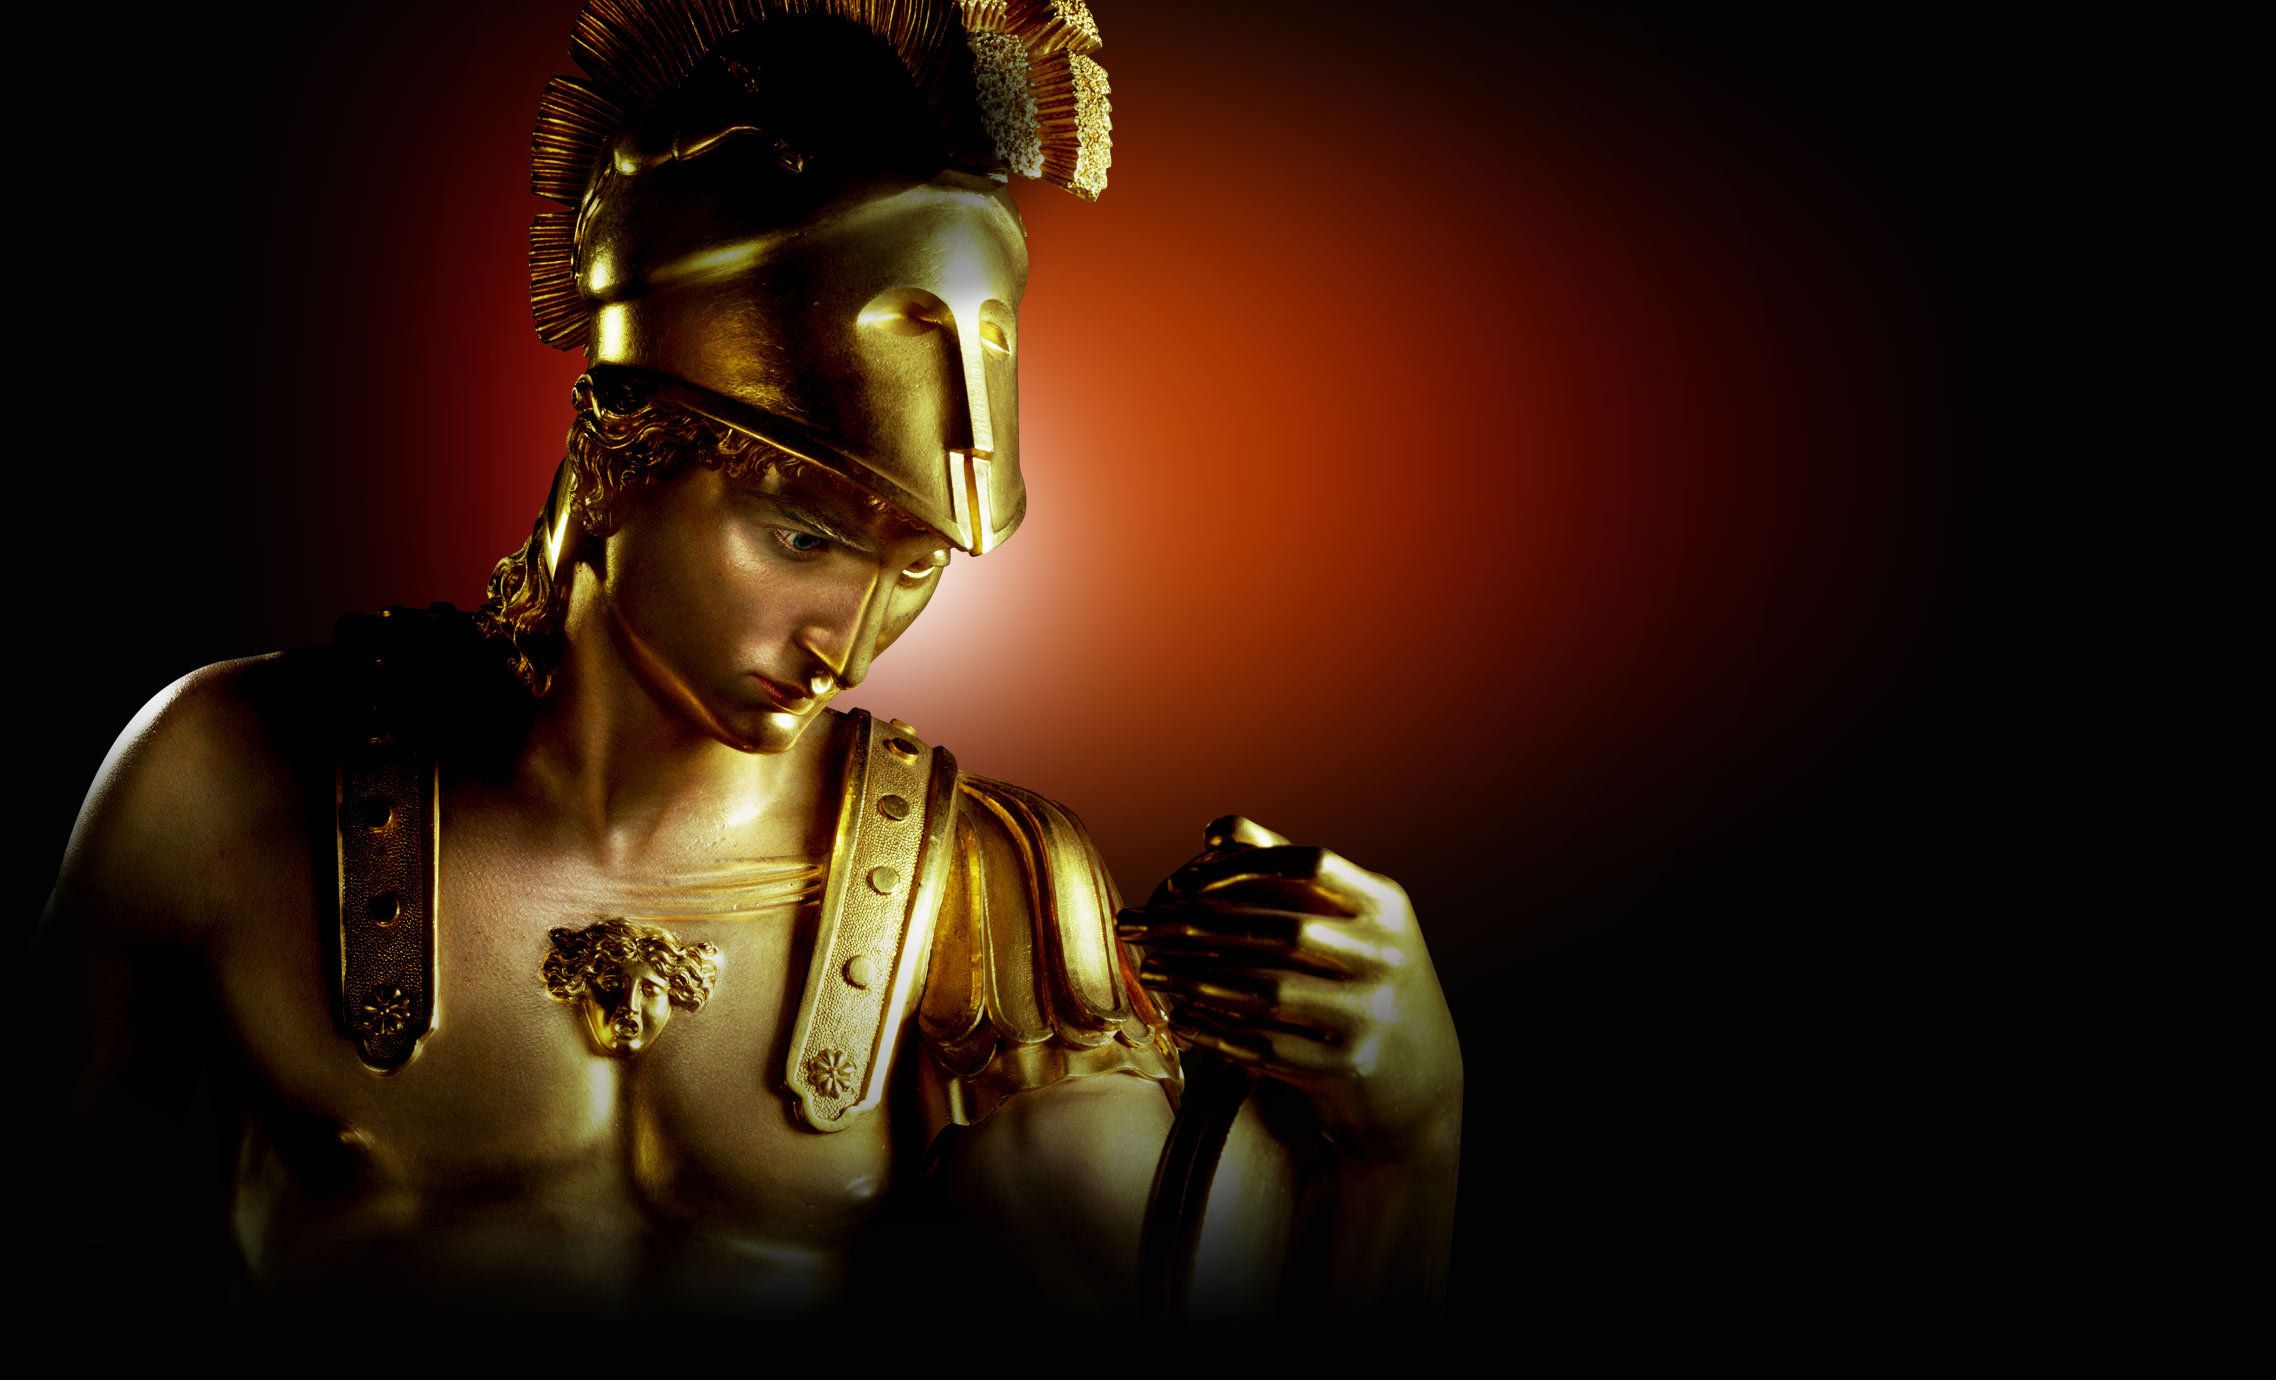 Cyrus The Great Wallpaper. Great